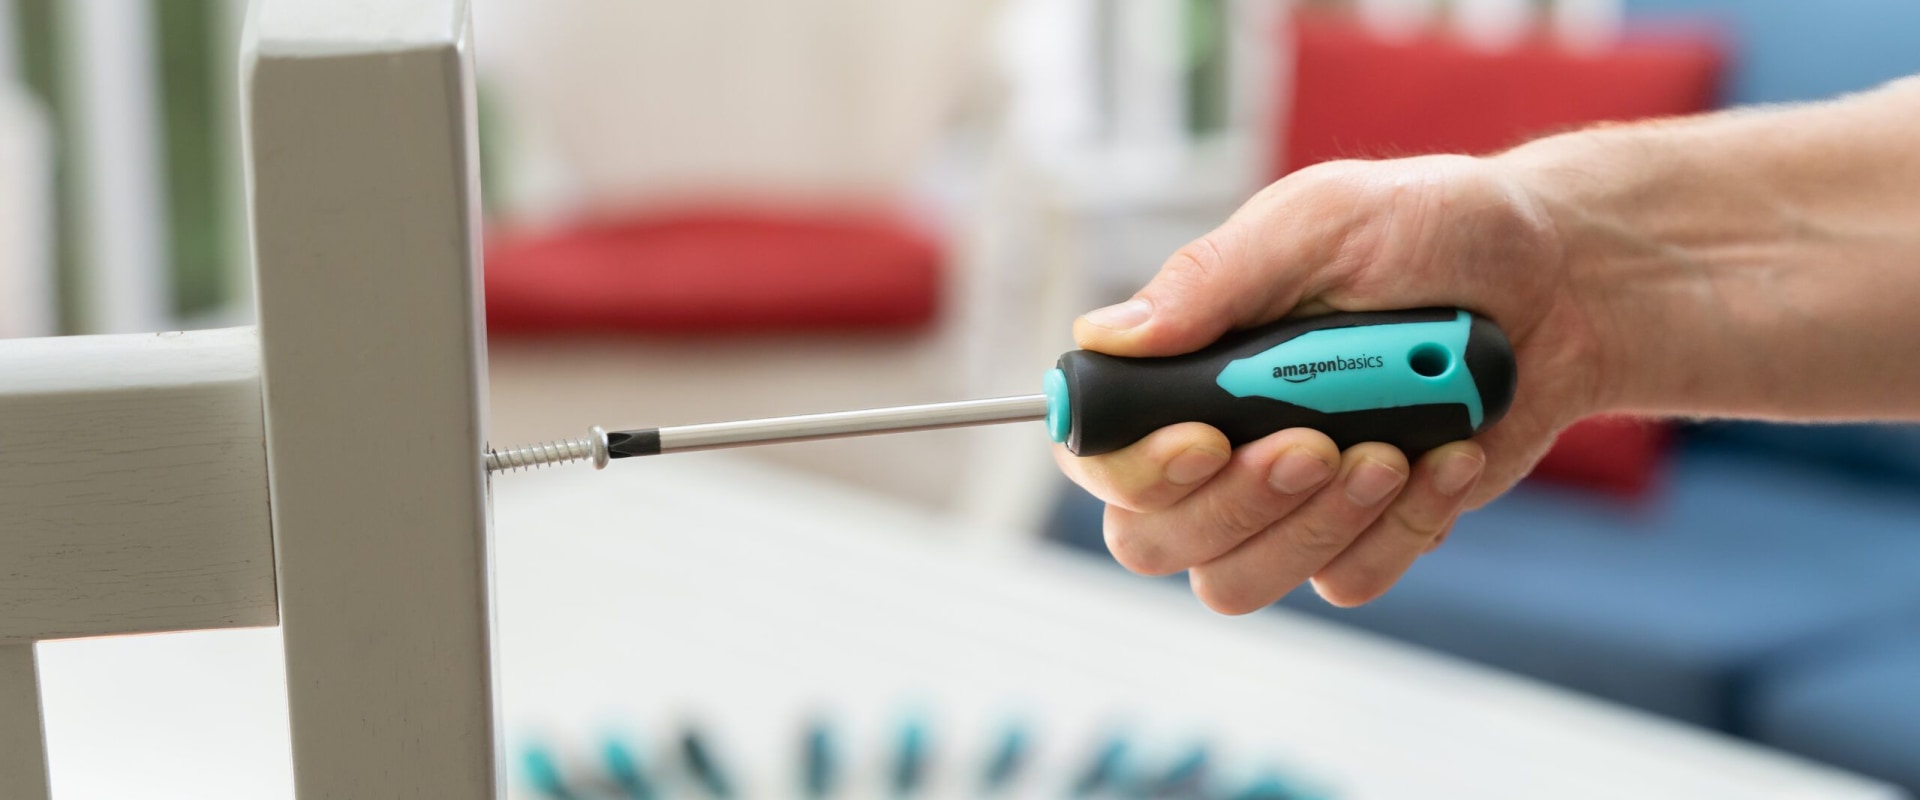 Top Rated Solar Screwdrivers Review